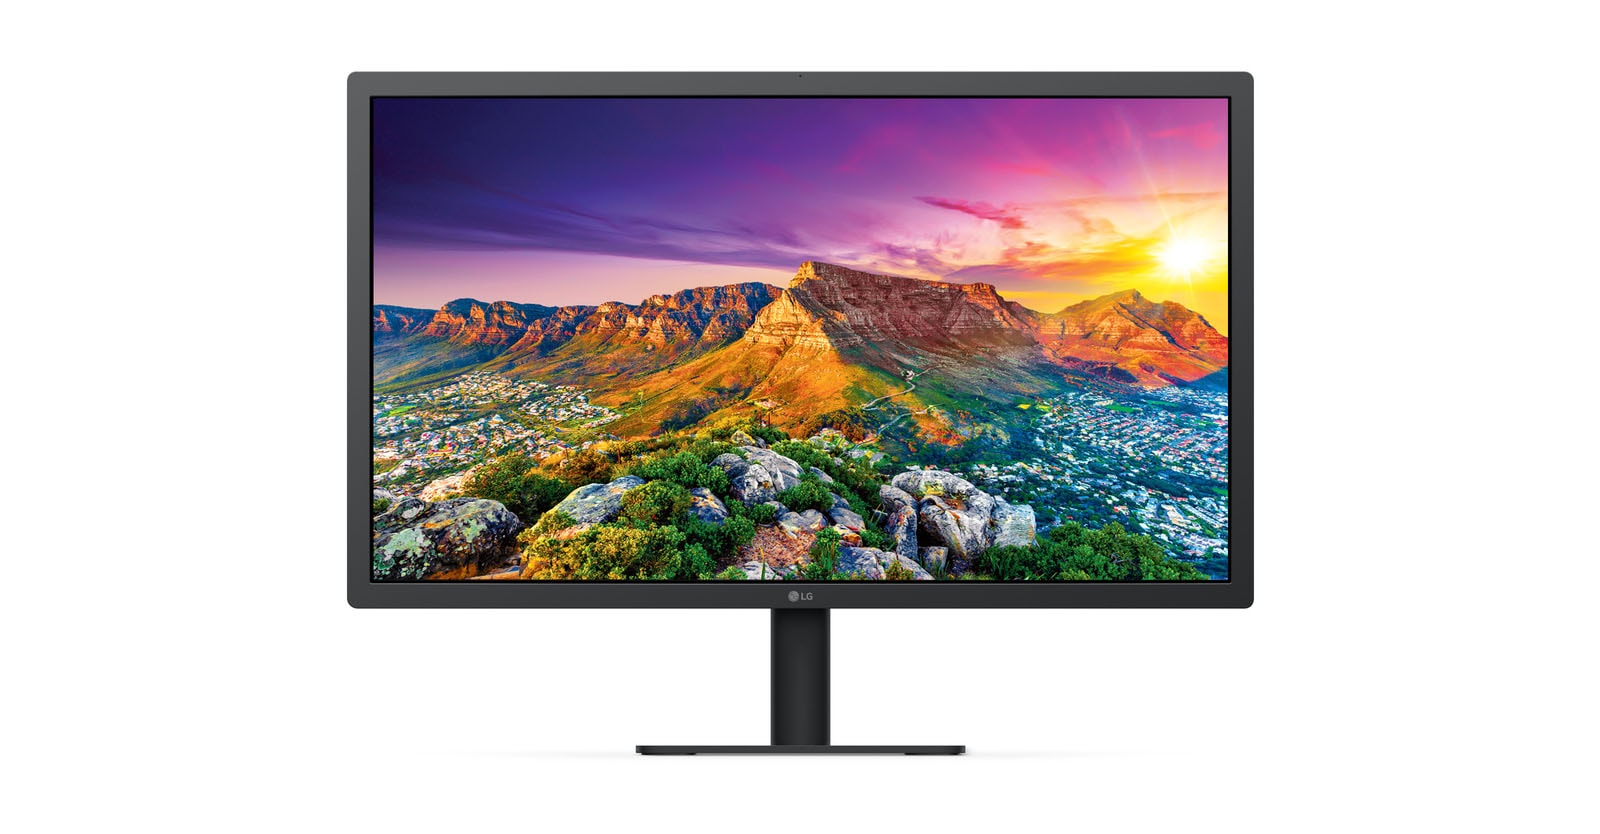 Mac Studio monitor buying guide: The LG UltraFine 4K is close to what a 24-inch Retina display from Apple would be like.